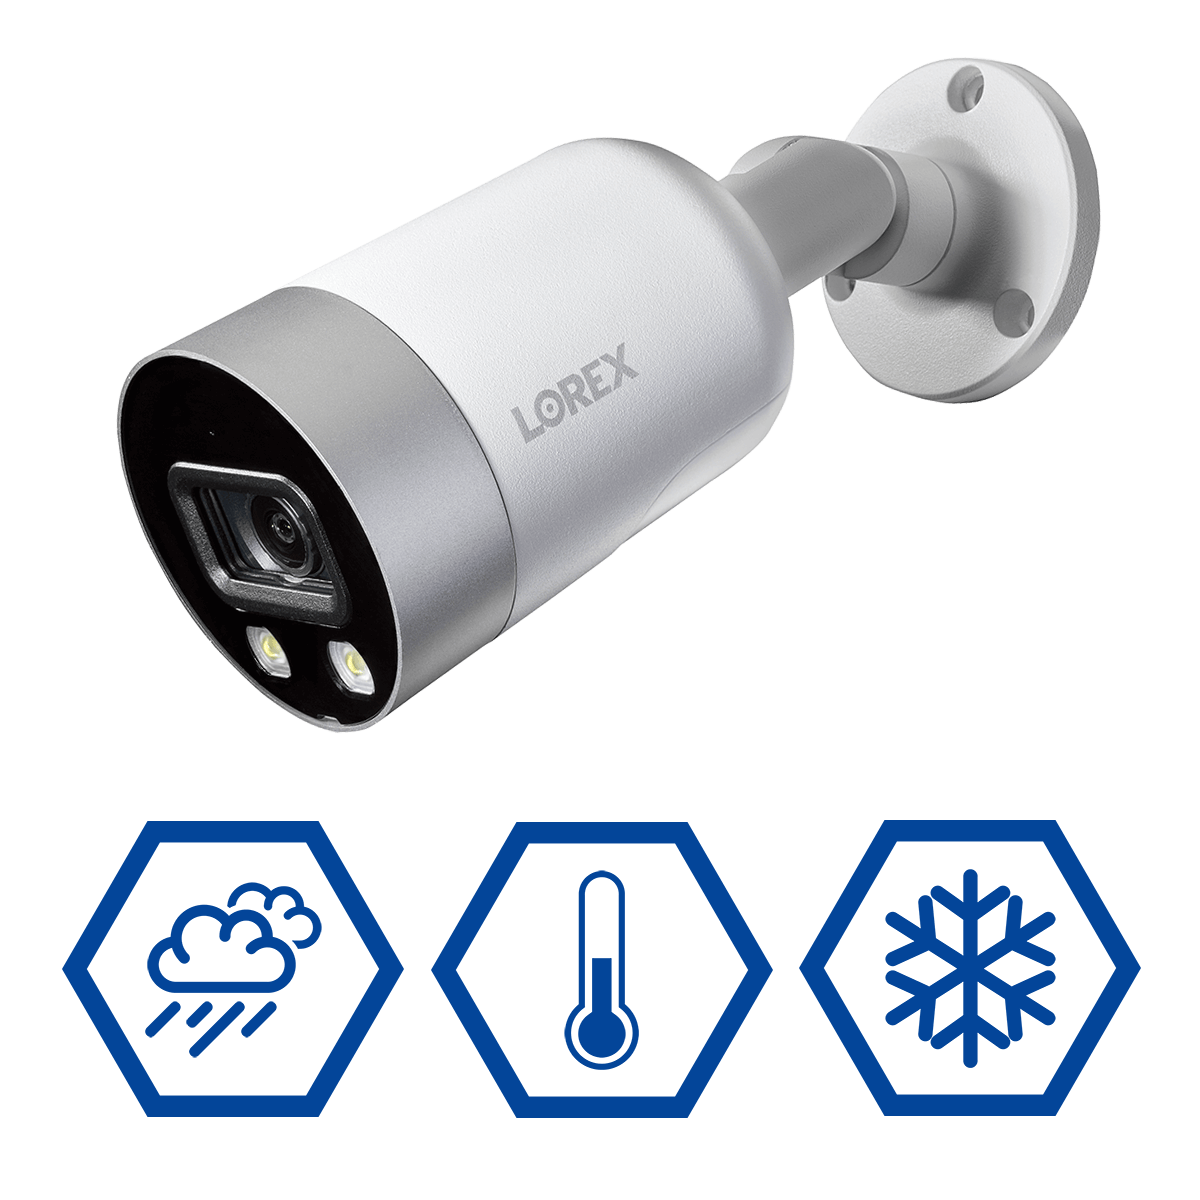 weatherproof 4K IP active deterrence smart security camera for year-round protection